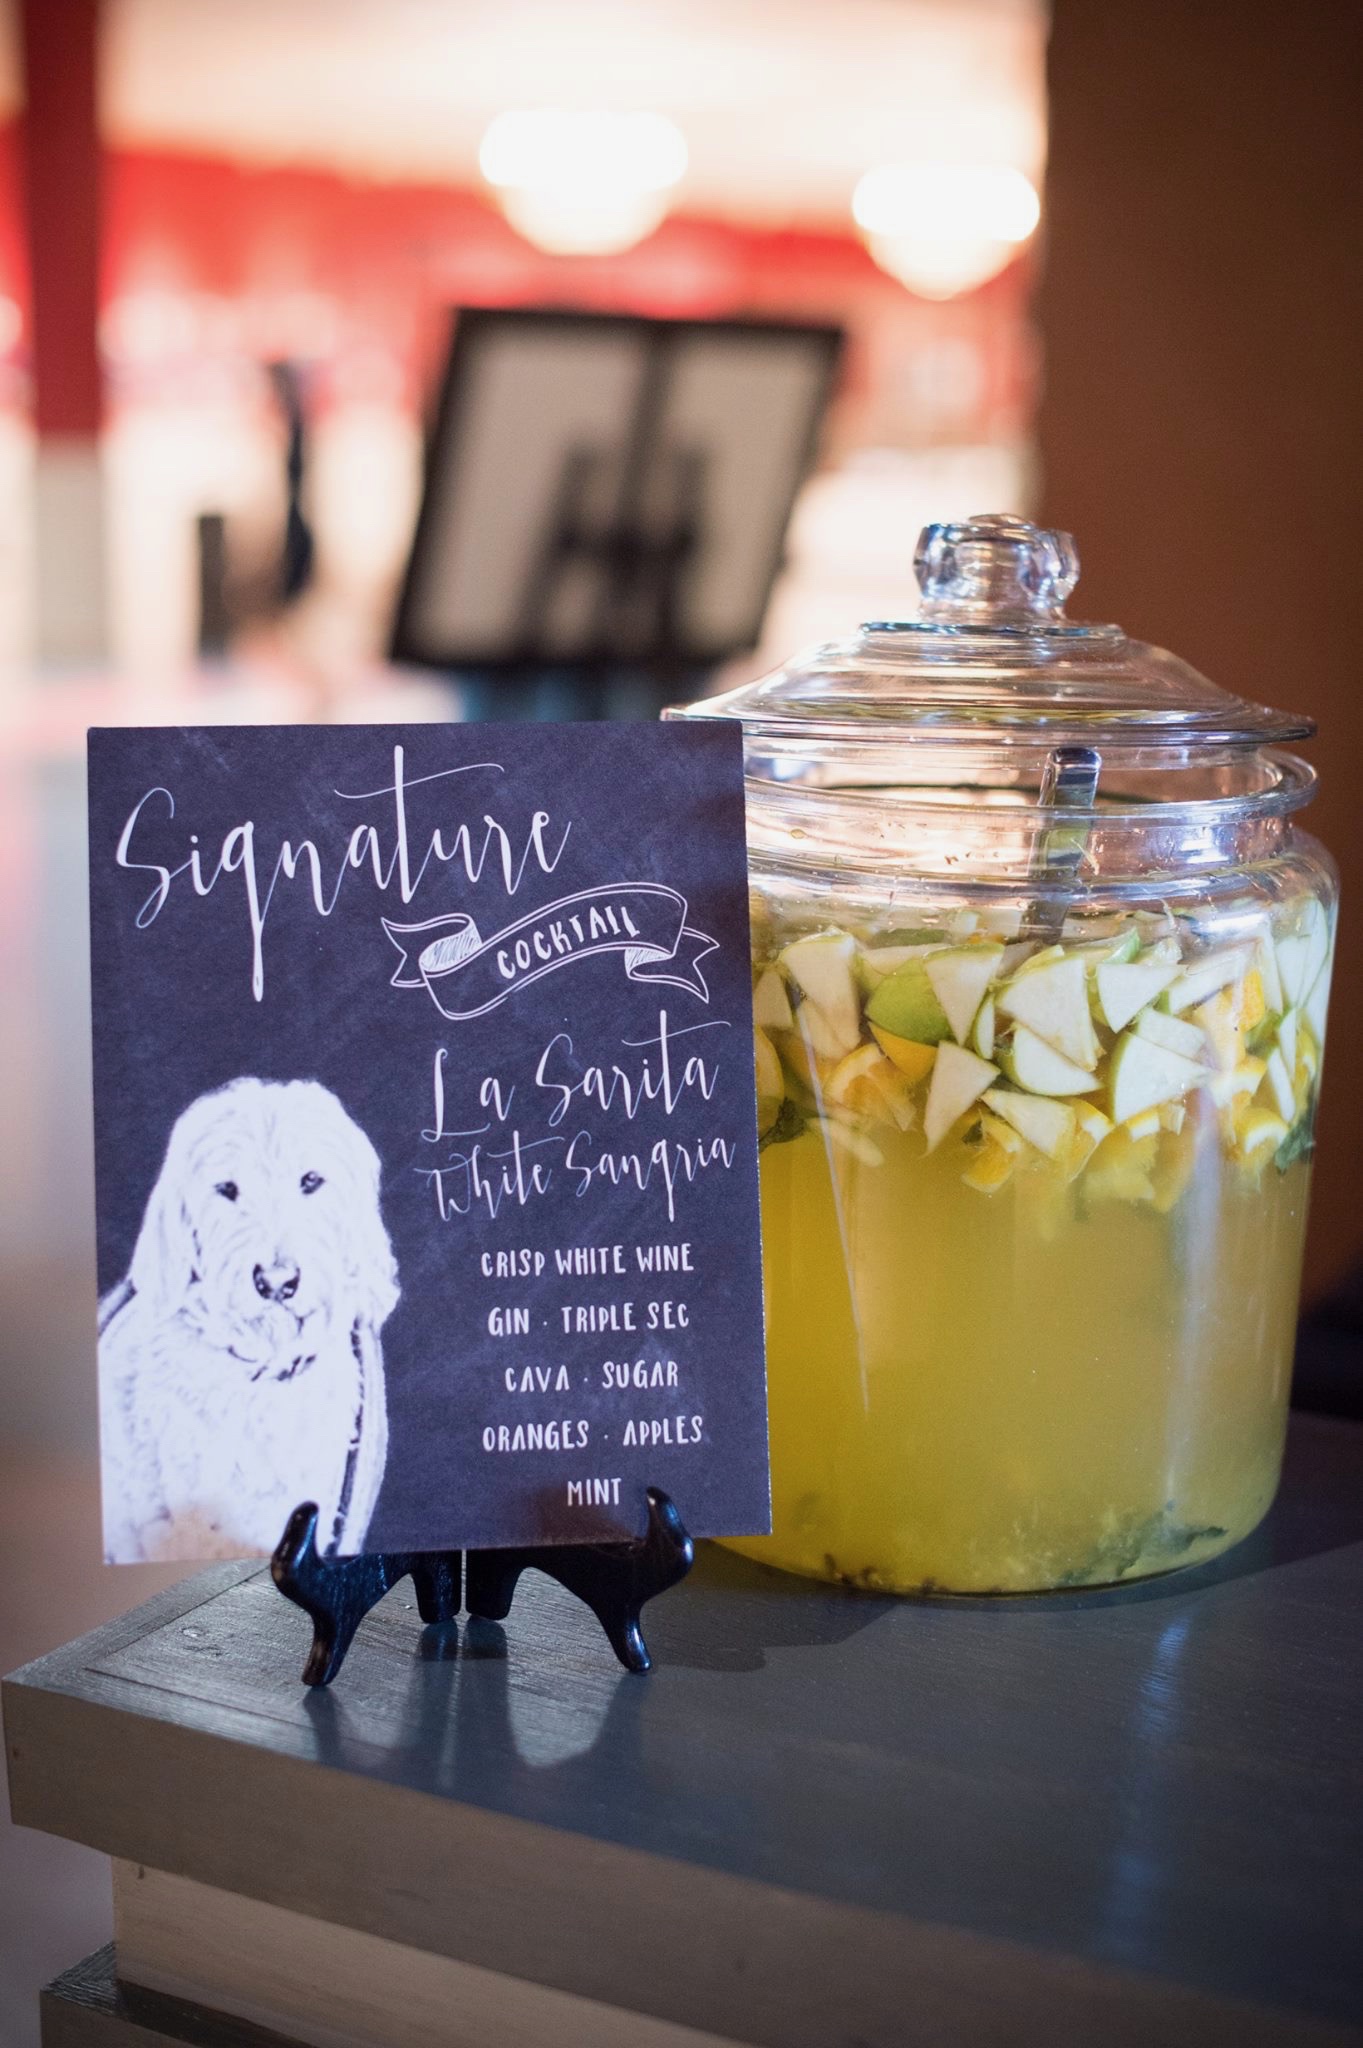 Naming a signuture cocktail after your furry friend is a fun way to include man's best friend www.avenueievents.com.jpg